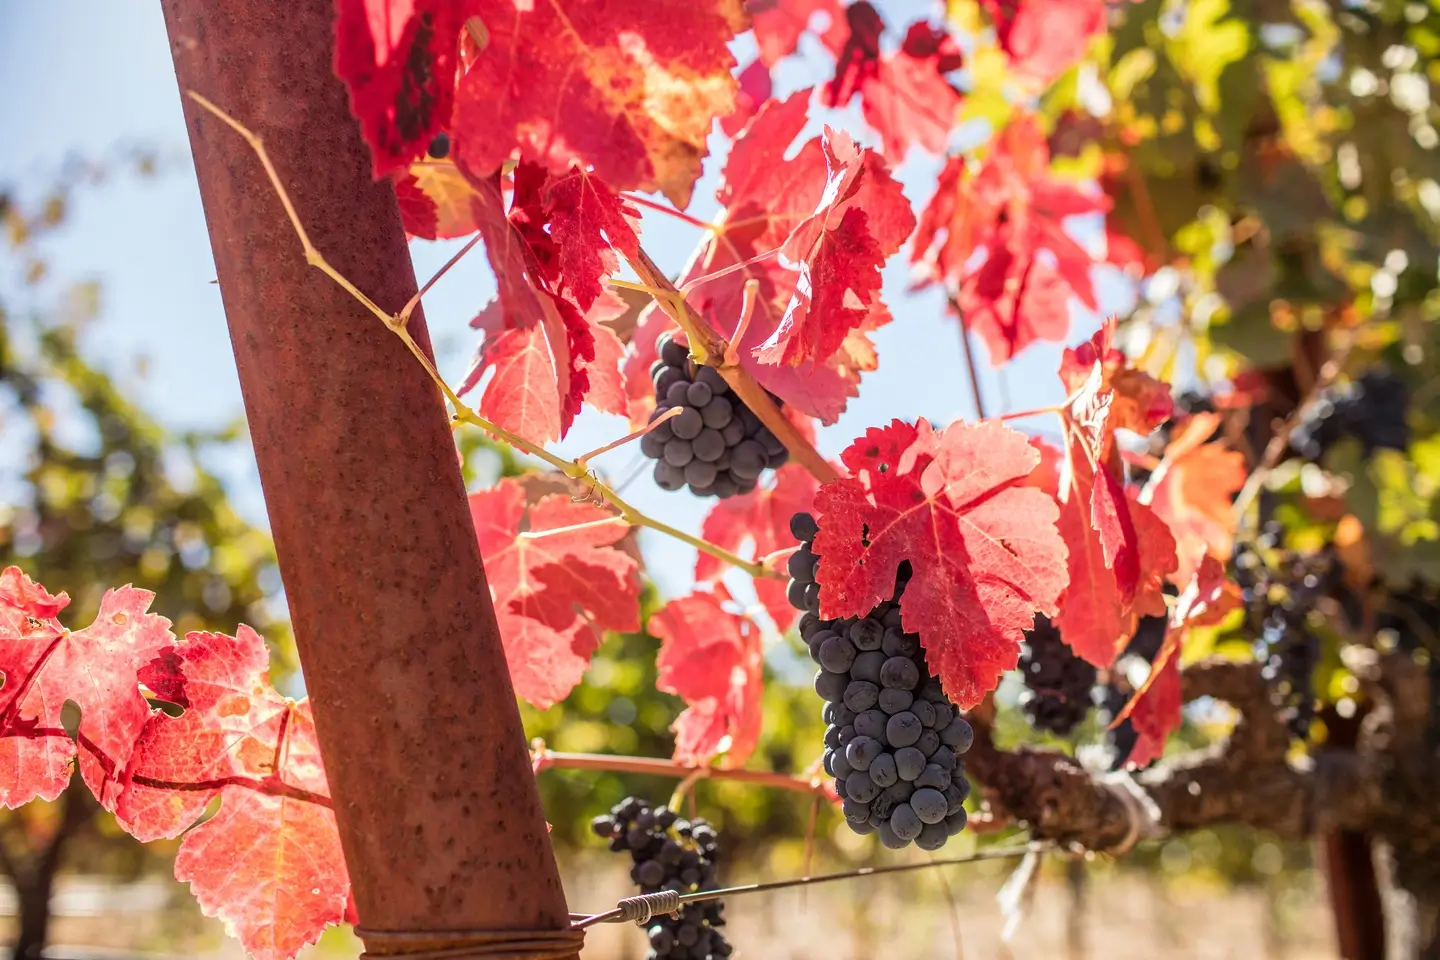 A close-up photograph of grapevines and grapes. The leaves are a rich red and the grapes are ripe. 